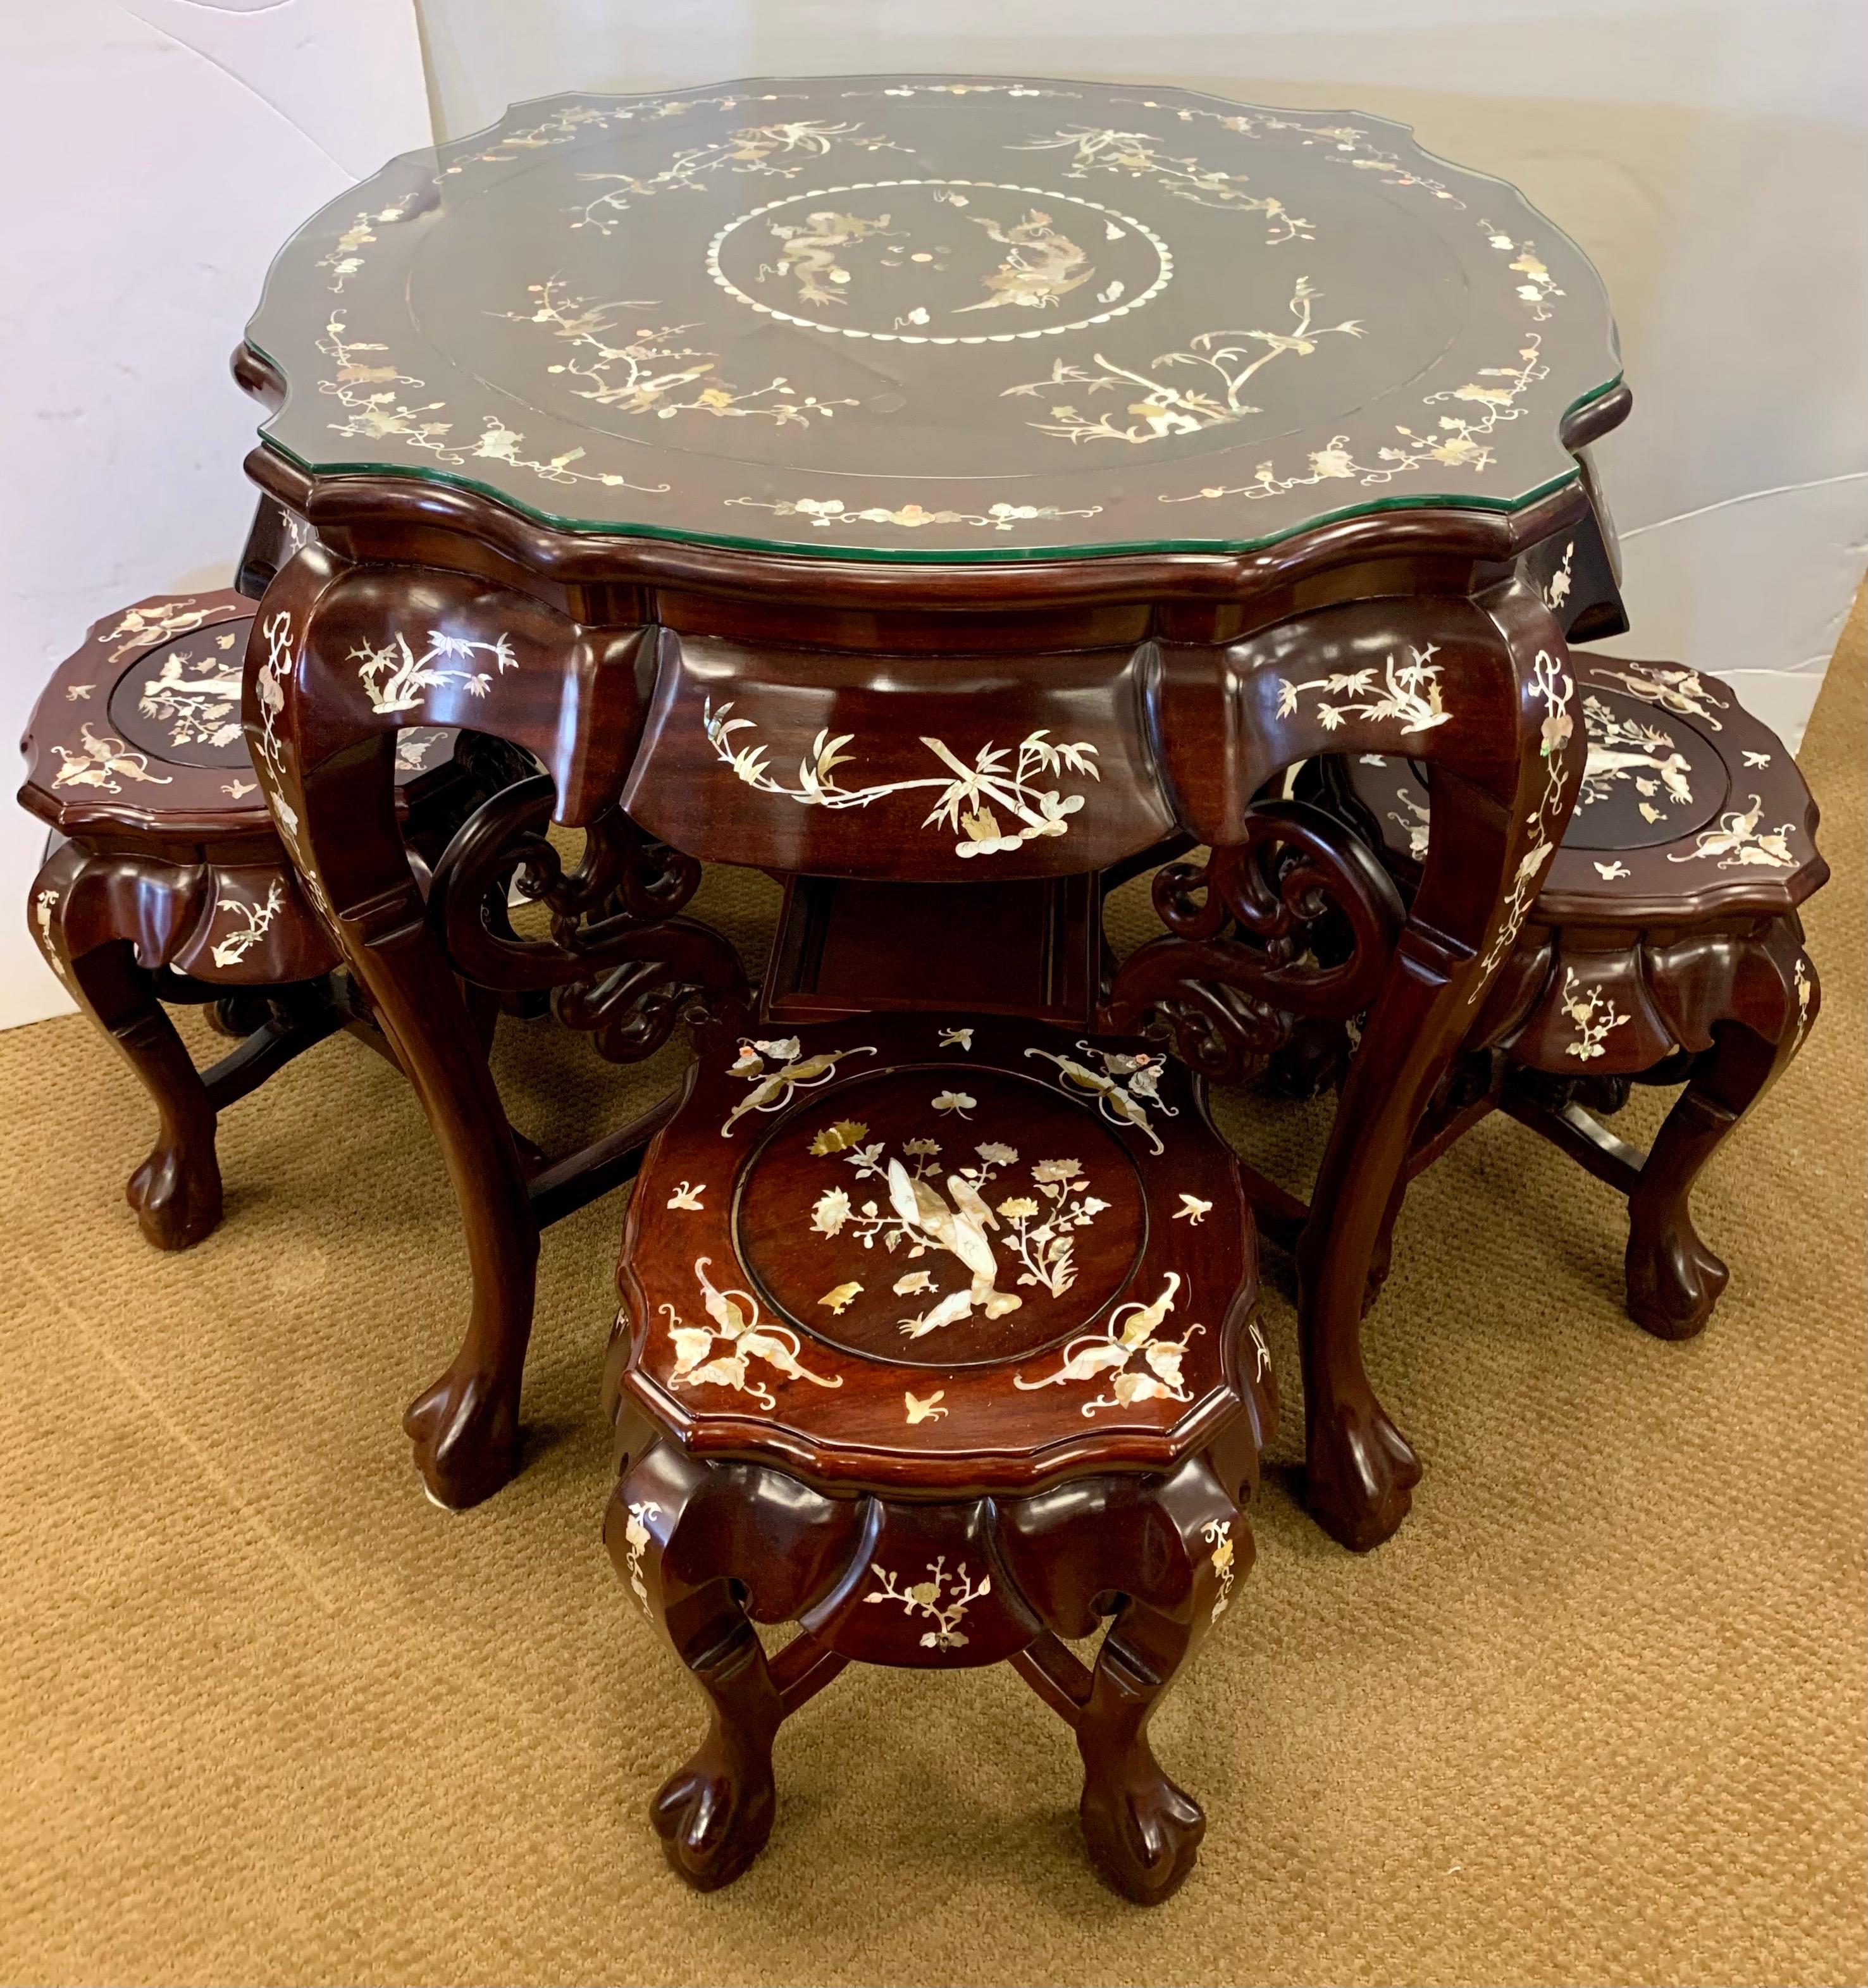 Intricately carved Chinese inlaid mother-of-pearl tea table, crafted from high quality rosewood. Inlay continues throughout the legs and frame, with four stools inlaid with floral motifs and a center scene of birds and butterflies. Tables and stools